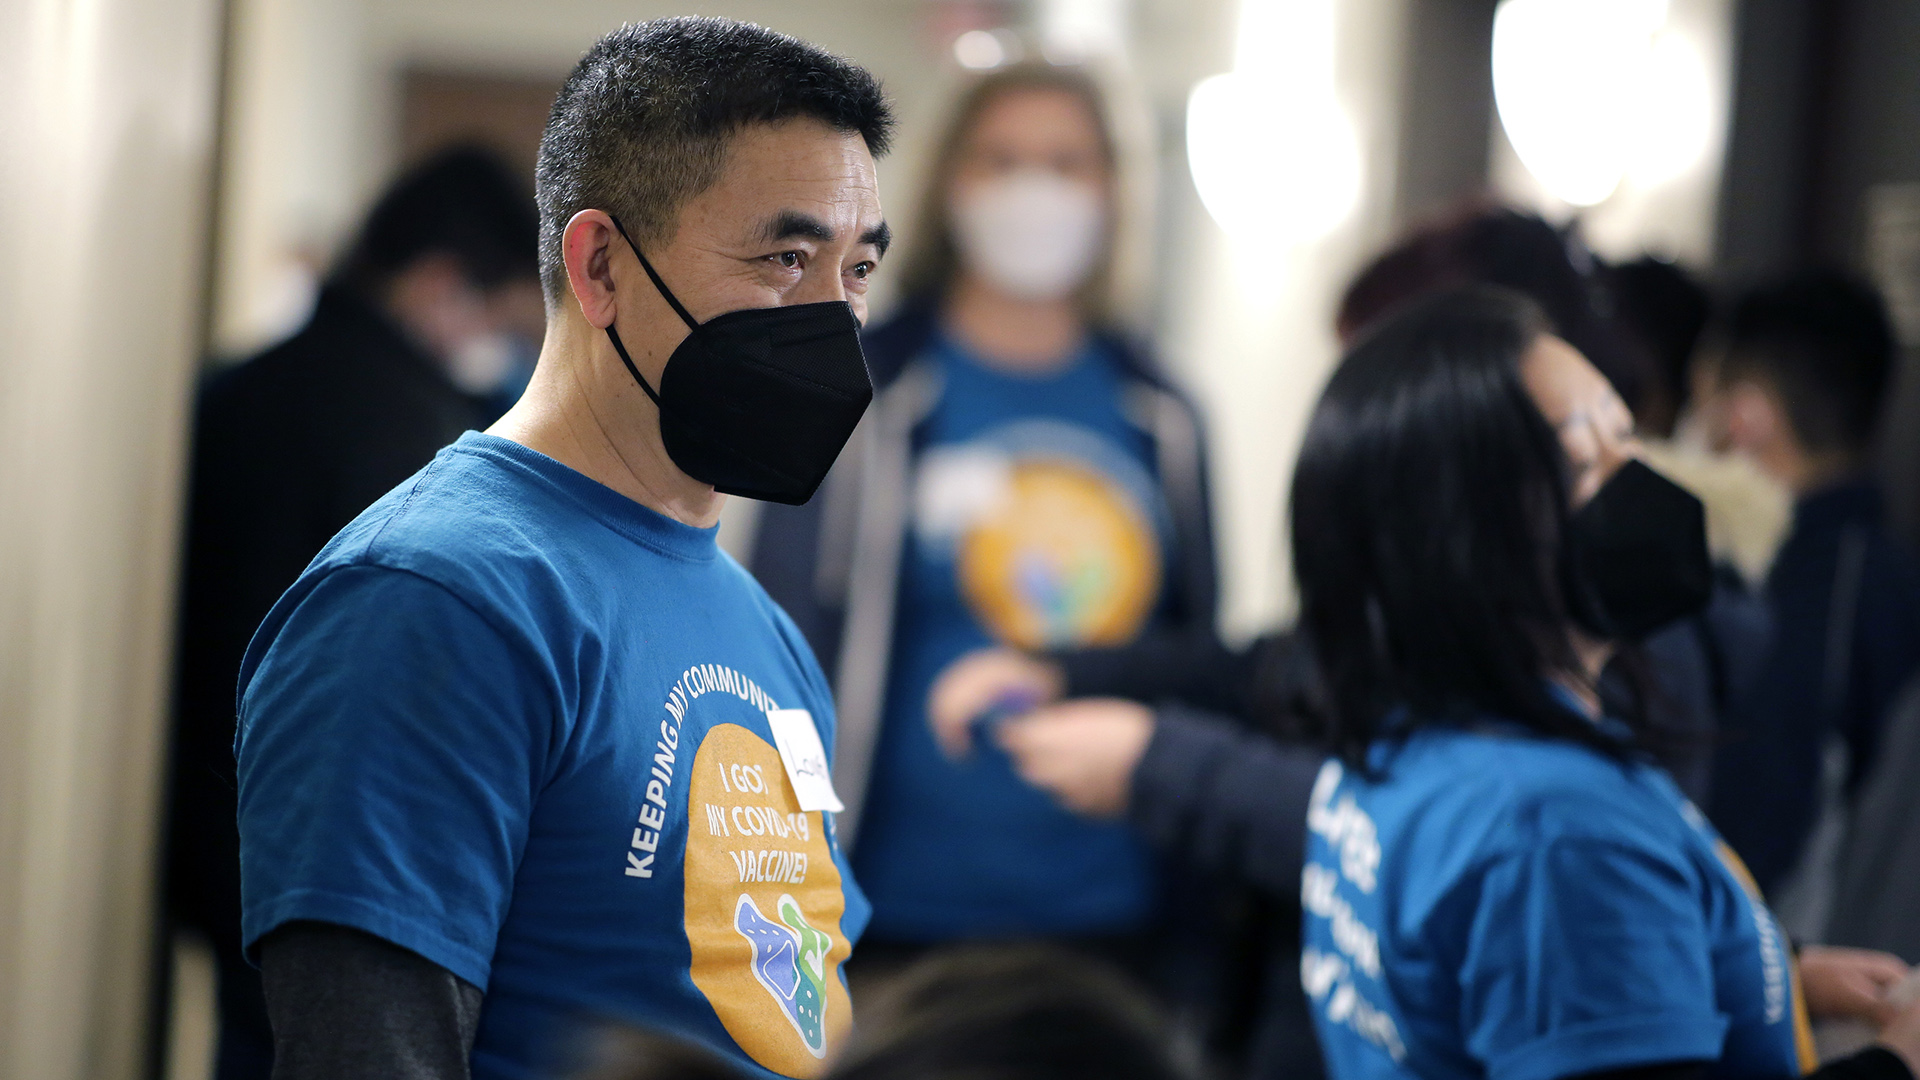 Long Vue stands in a room while wearing a face mask, surrounded by other people wearing face masks.